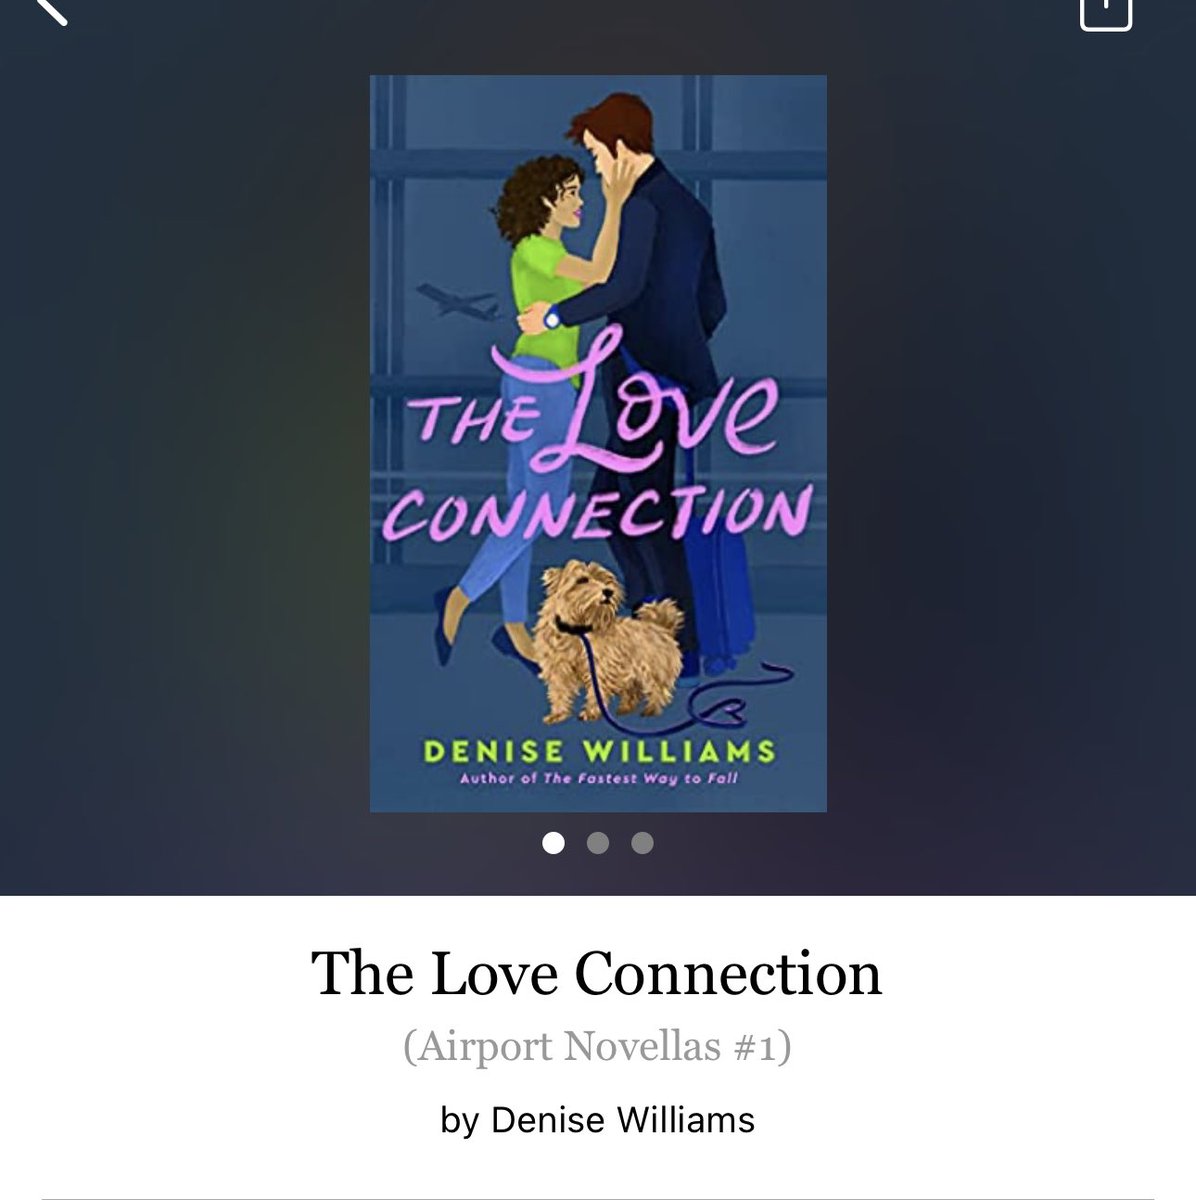 The Love Connection by Denise Williams 

#TheLoveConnection by #DeniseWilliams #5135 #21chapters #128pages #July2023 #678of400 #4hourAudiobook #Audiobook #series #AirportNovellaSeries #BennettAndOllie #Book1of3 #clearingoffreadingshelves #whatsnext #readitquick